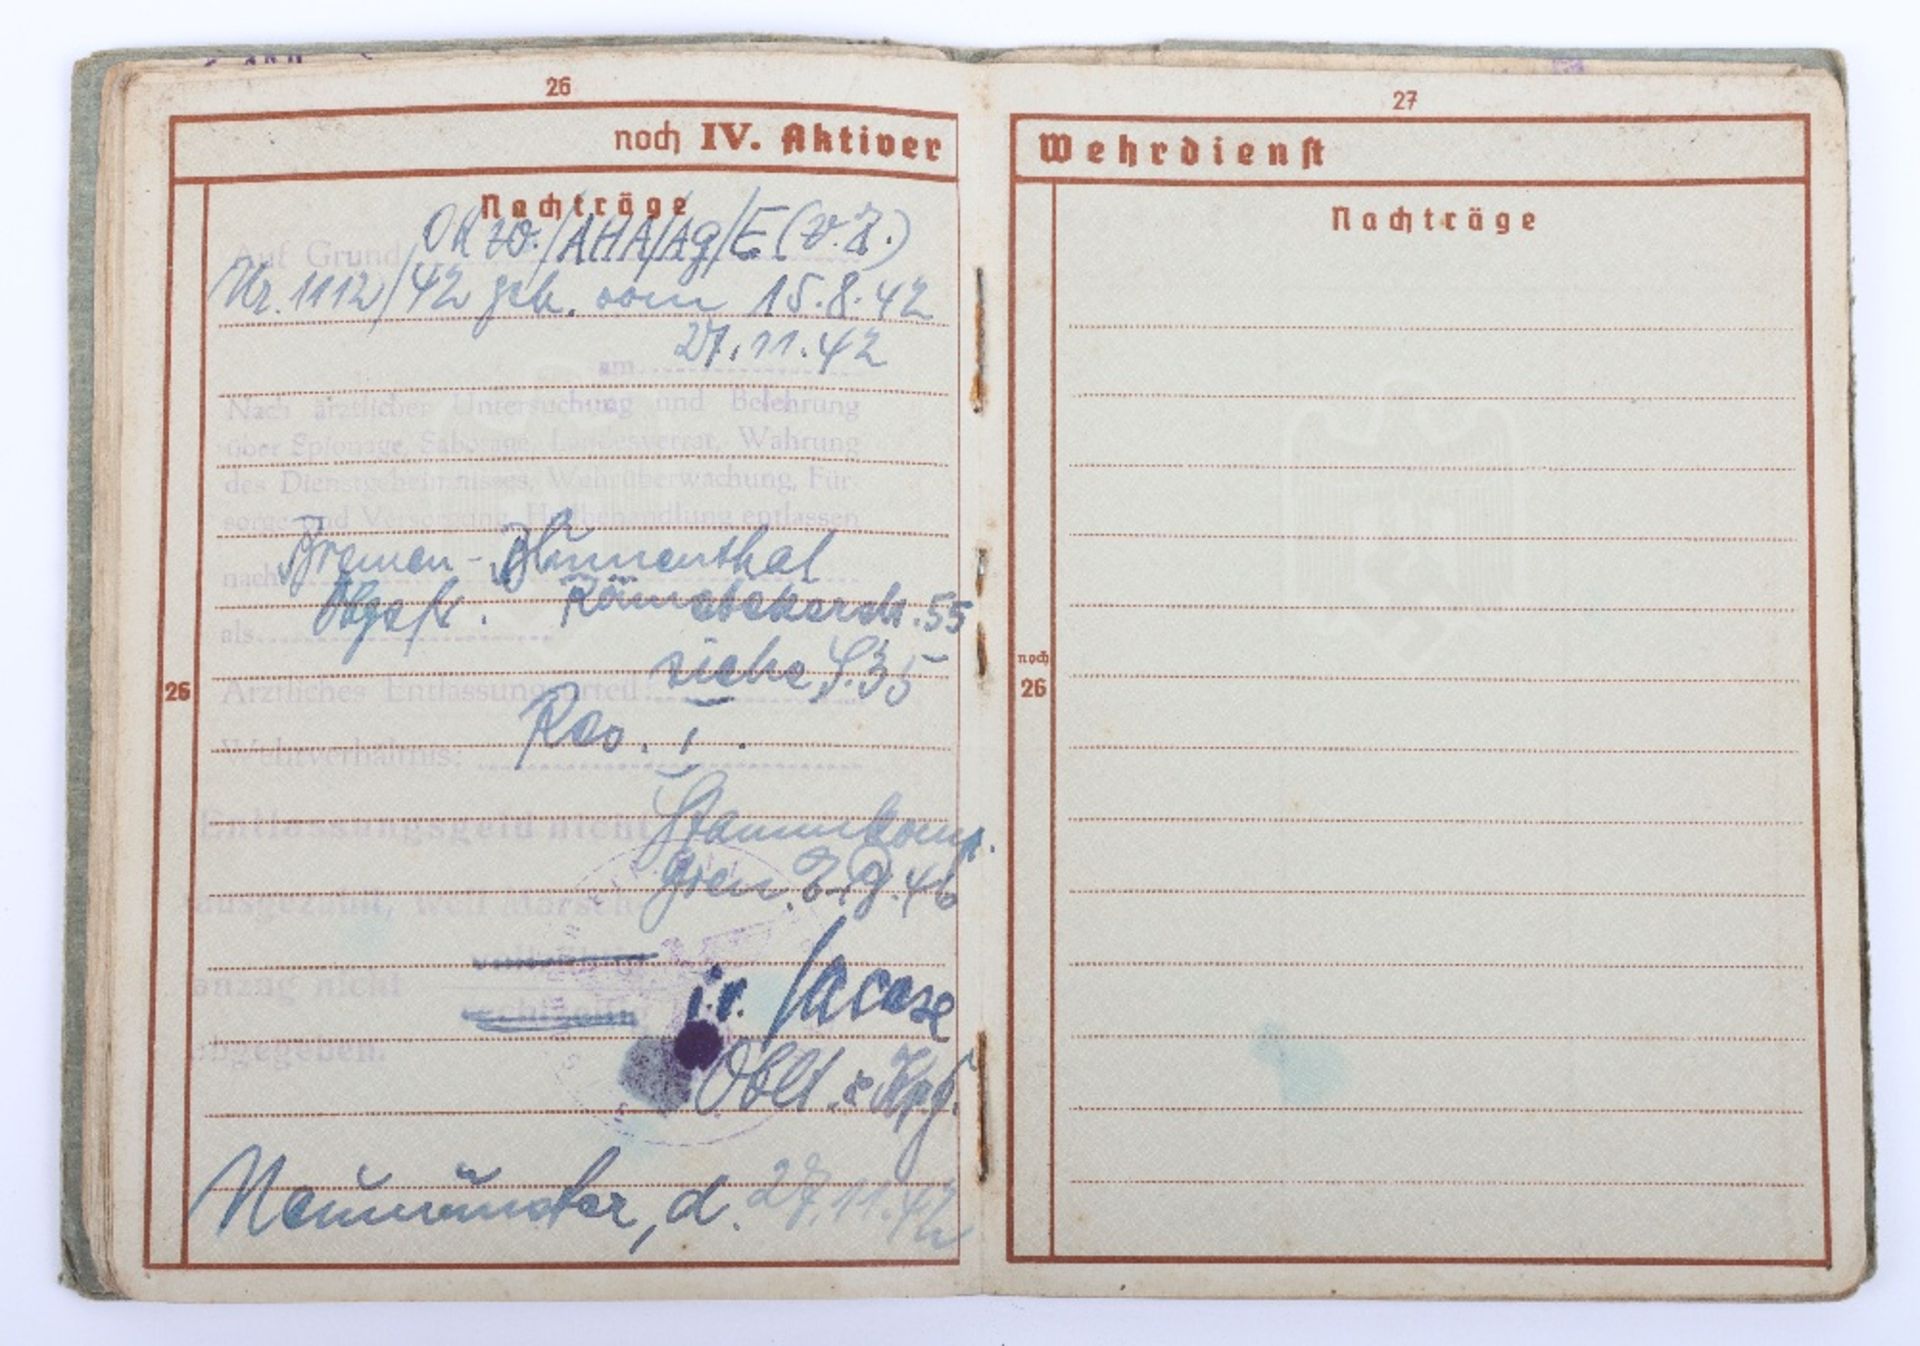 WW2 German Wehrpass to F. Christoffers, Inf. Rgt. 47, Inf. Rgt. 401, Nordfront, Russian Front - Bild 13 aus 21